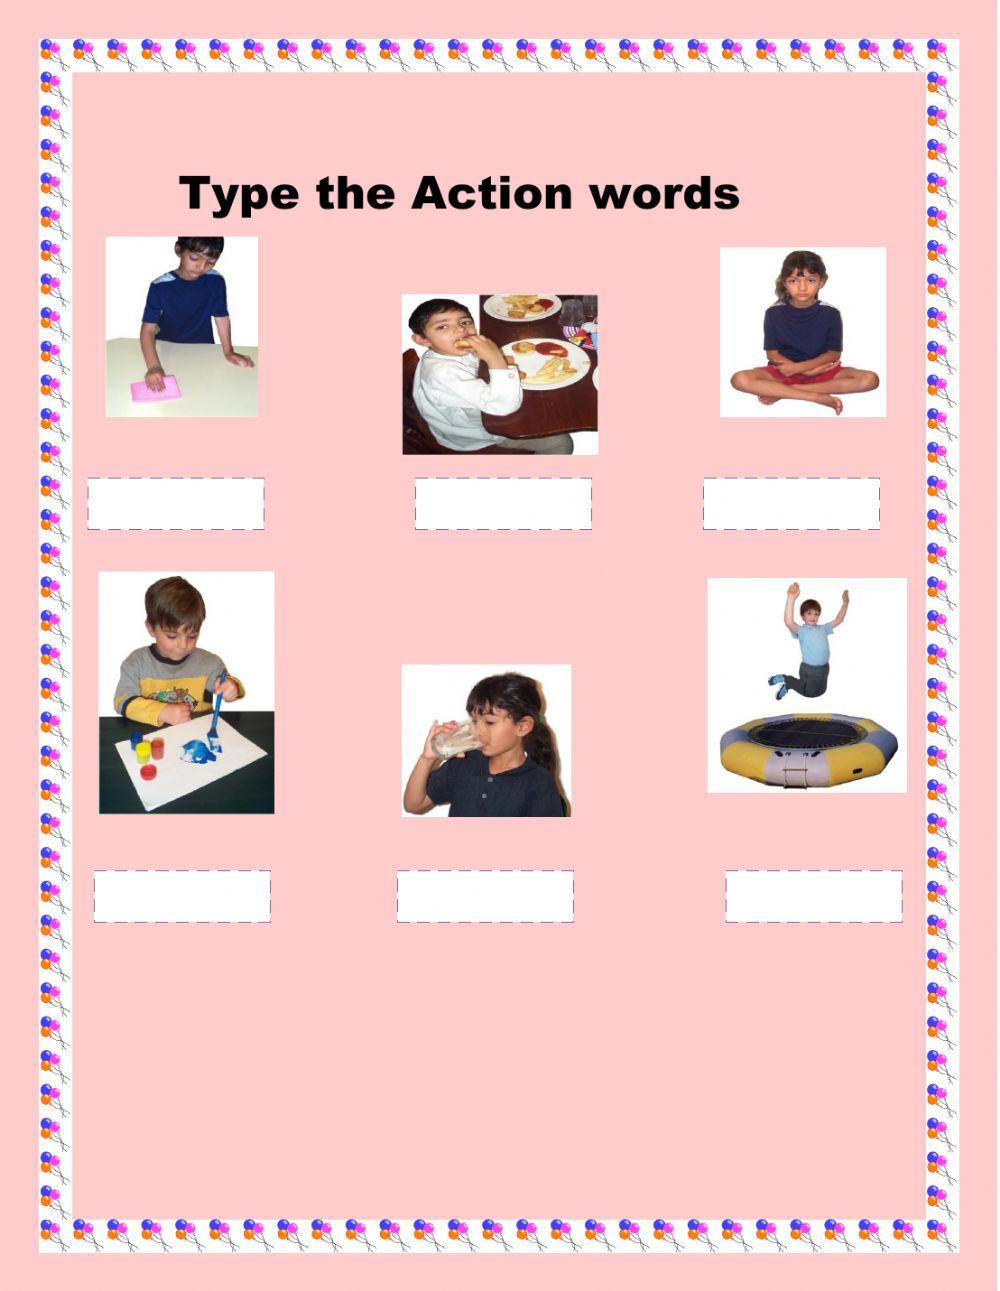 Type the Action words